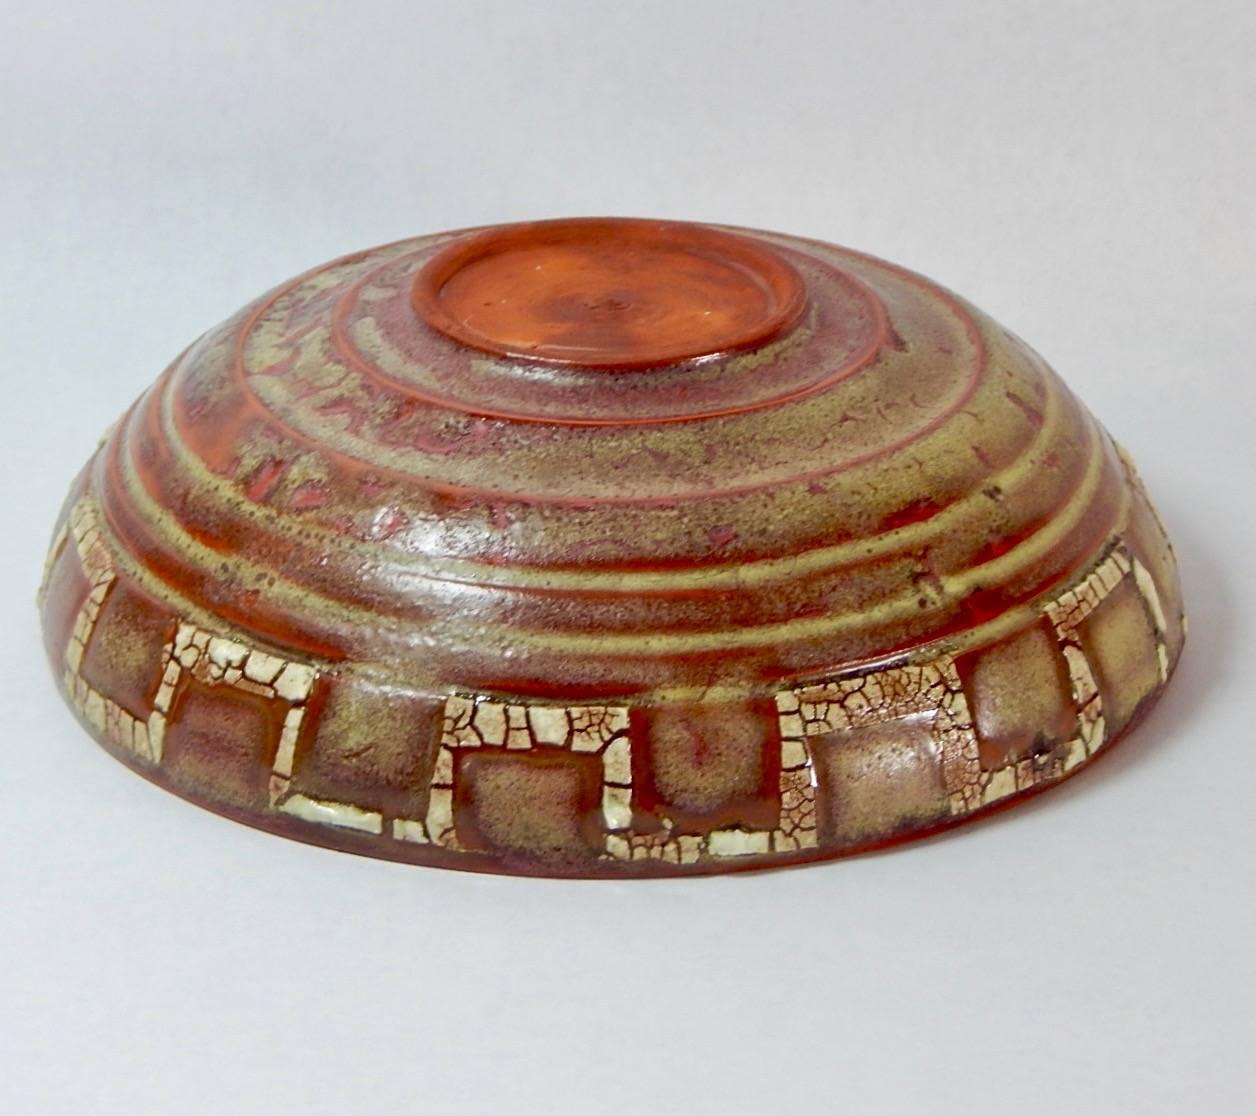 Organic Modern Relicware Earthenware Bowl # 88 by Andrew Wilder